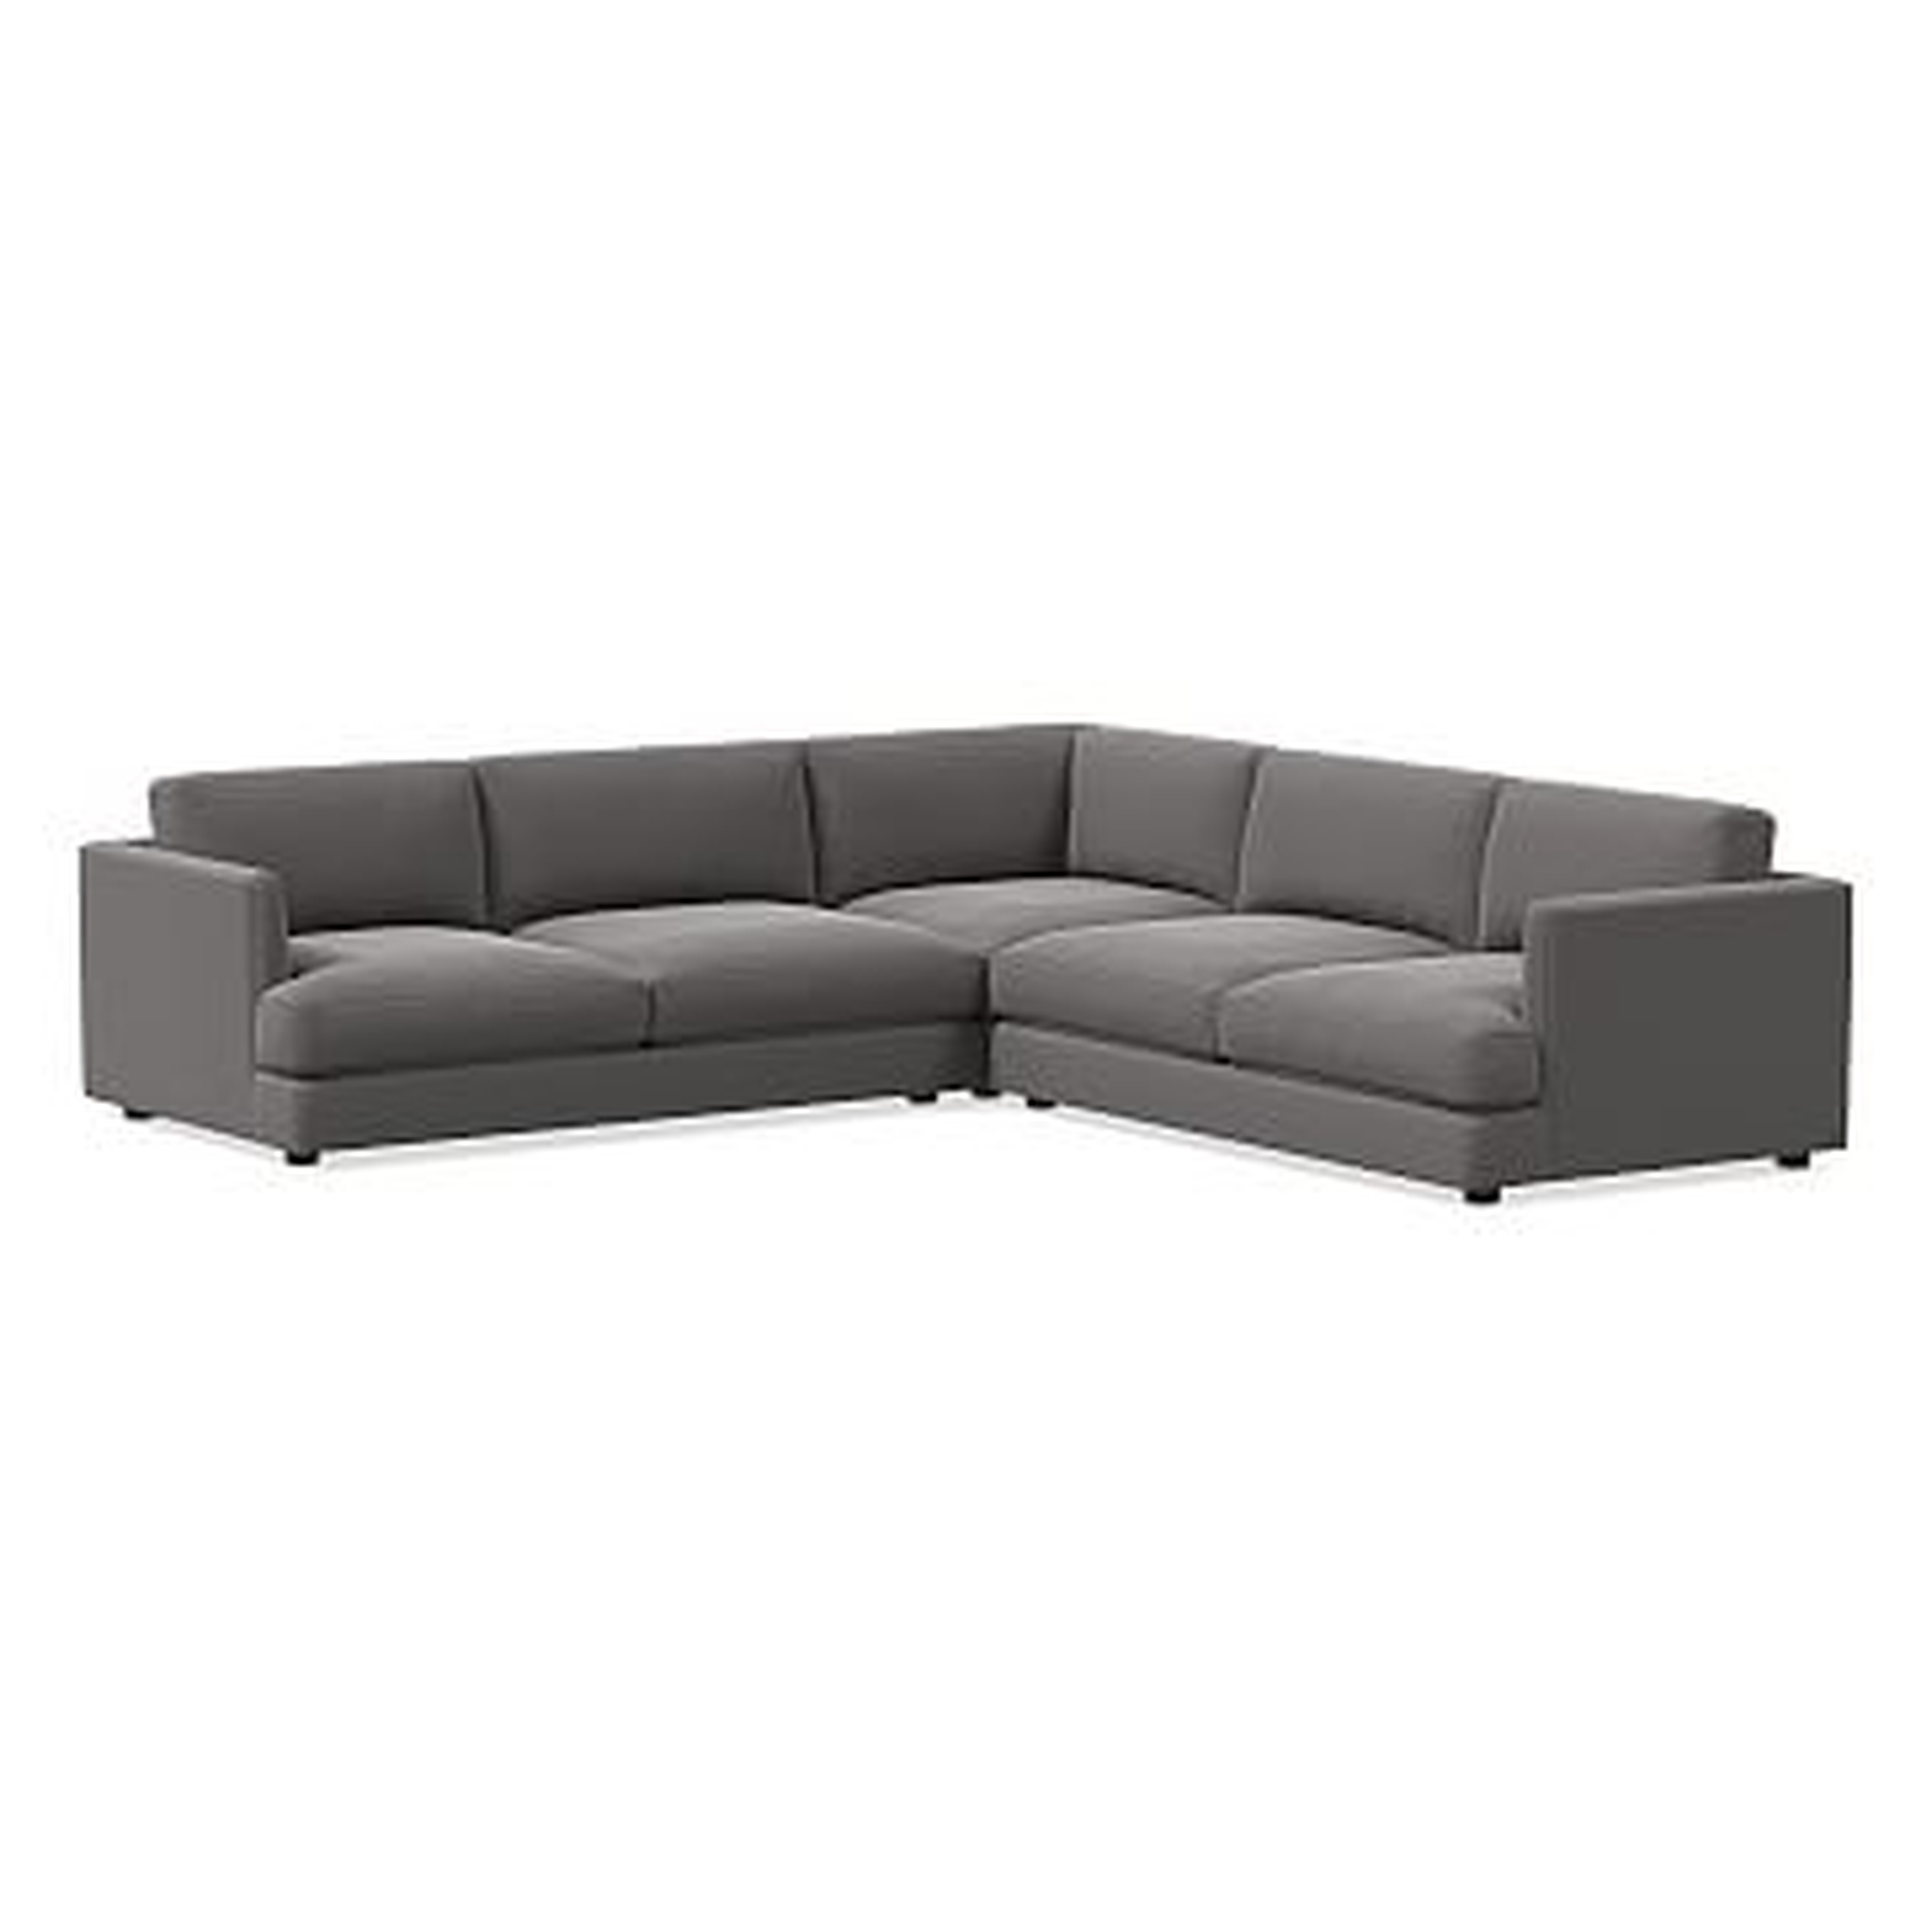 Haven Sectional Set 03: Left Arm Sofa, Corner, Right Arm Sofa, Marled Microfiber, Heather Gray, Concealed Support, Trillium - West Elm